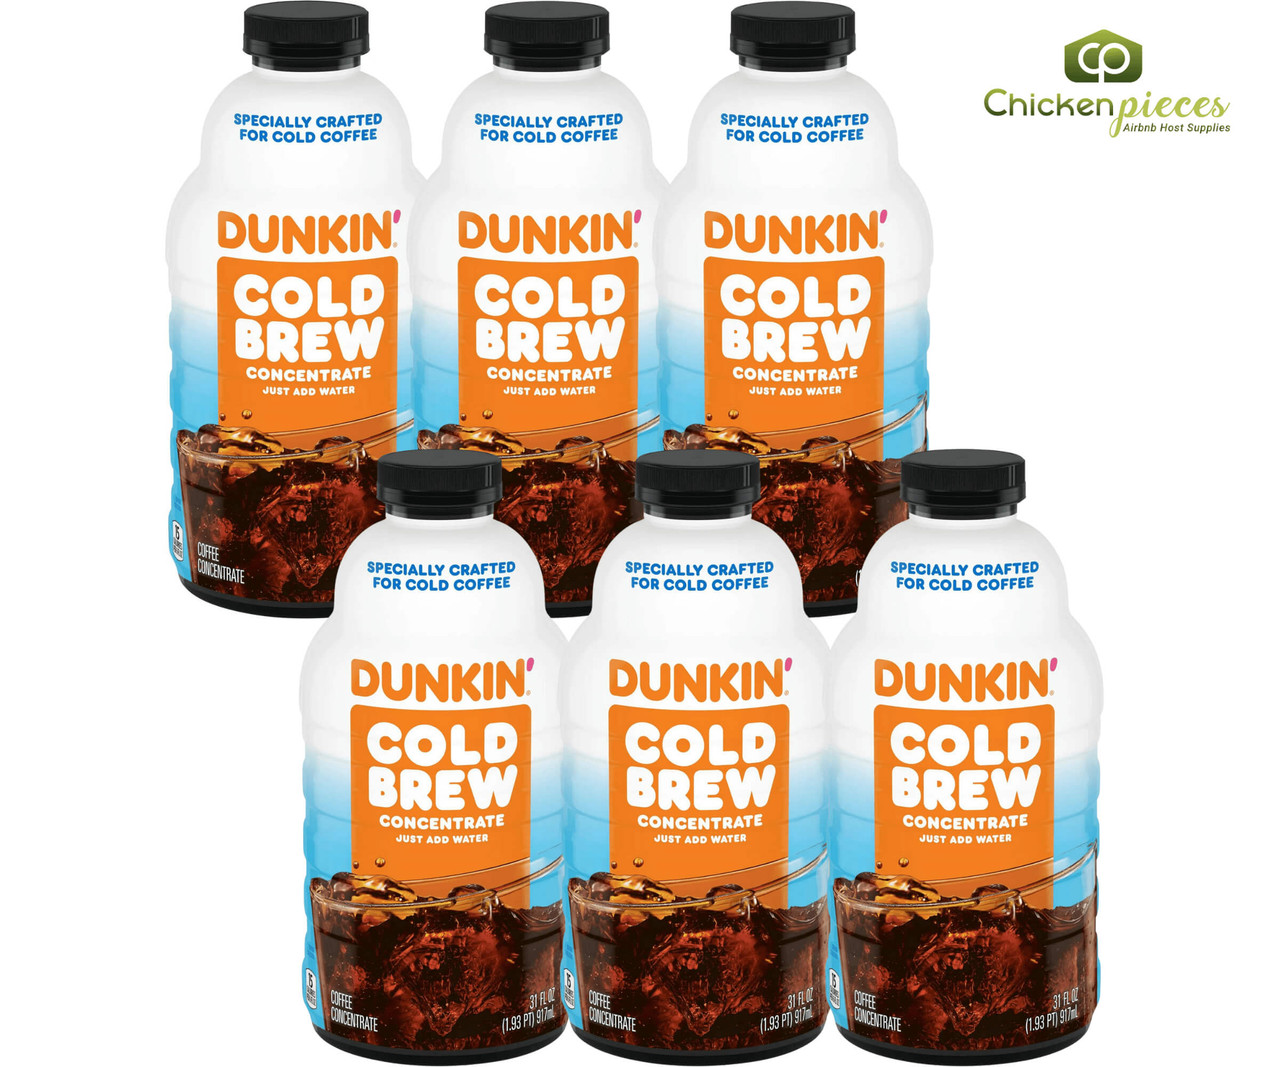 Dunkin Cold Brew Coffee Concentrate - 917ml (31 oz)-6/CASE- CHICKEN PIECES